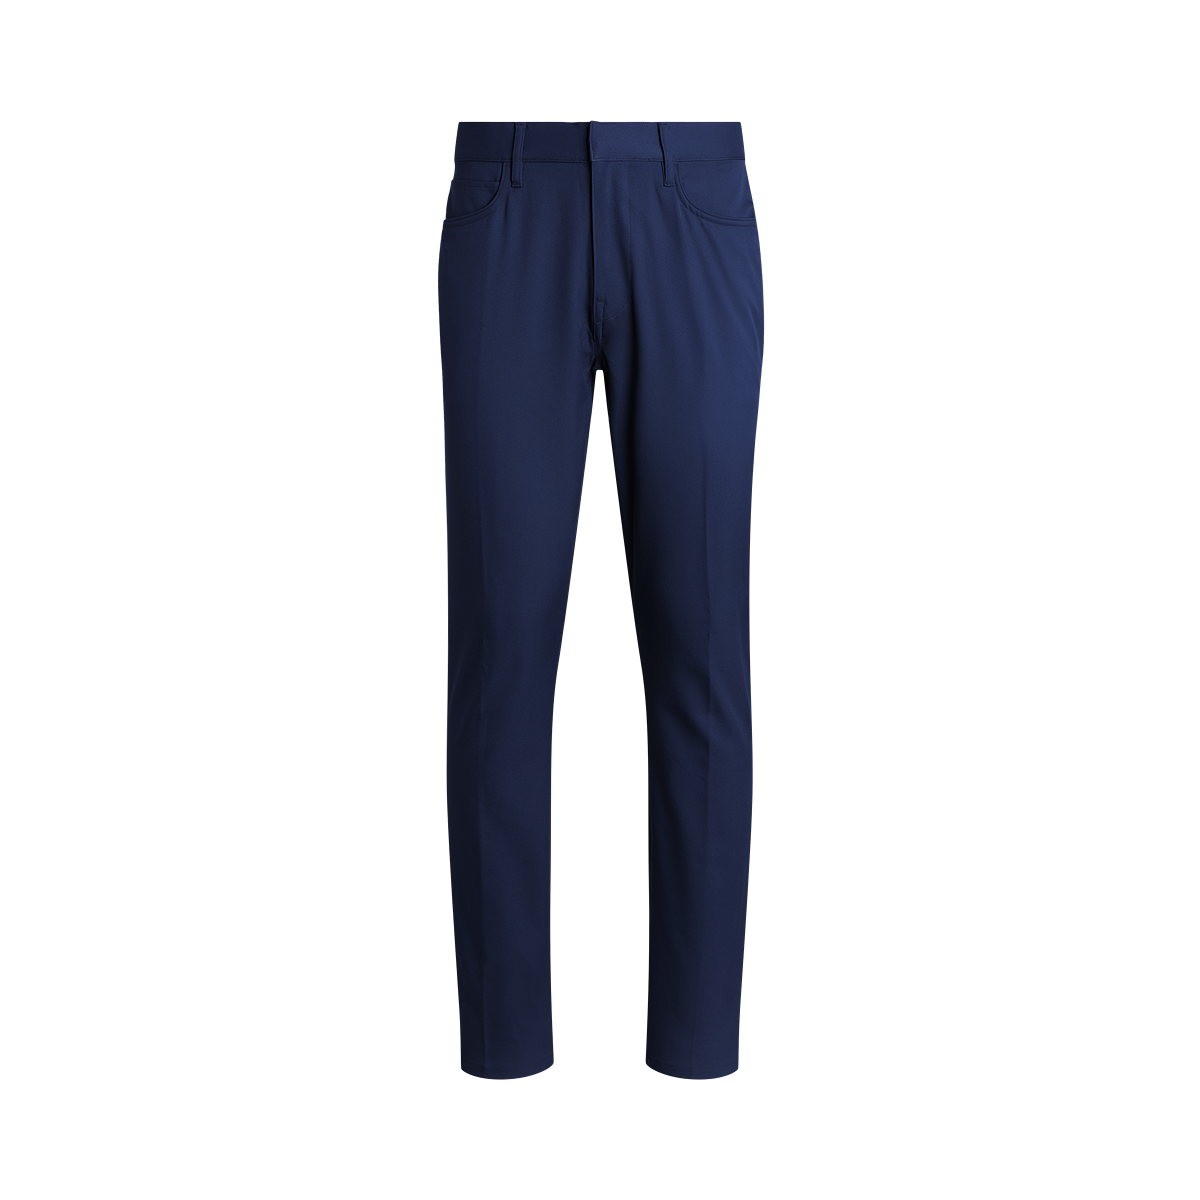 MIDWEIGHT MOBILITY TECH 5-POCKET PANT - ACTIVE FIT Large Image